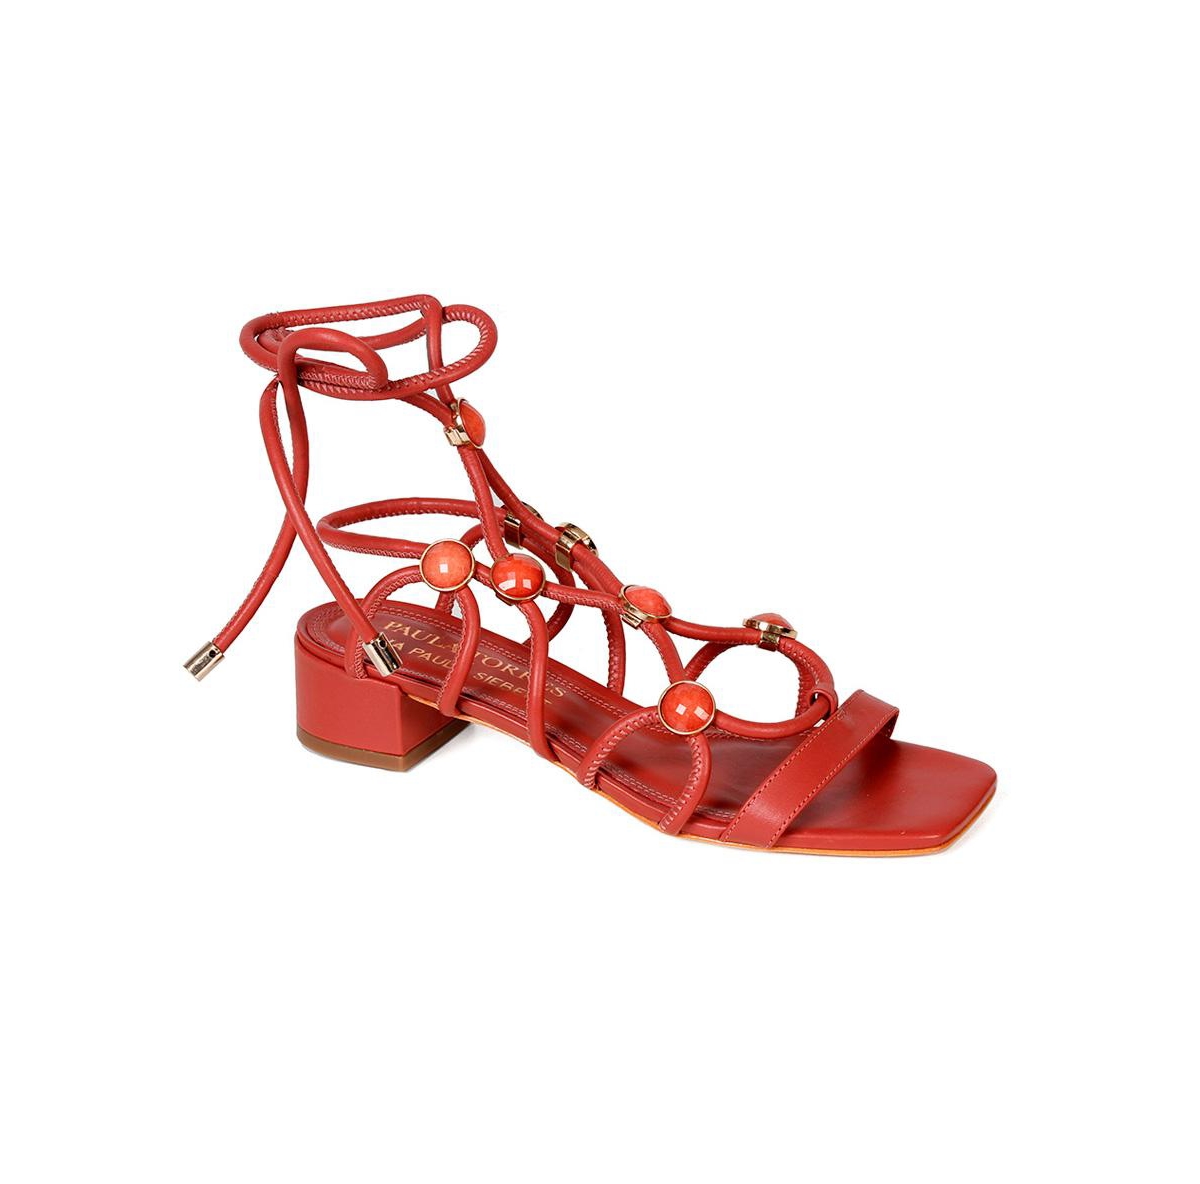 Shoes Women's Ana Strappy Dress Sandals - Moroccan red